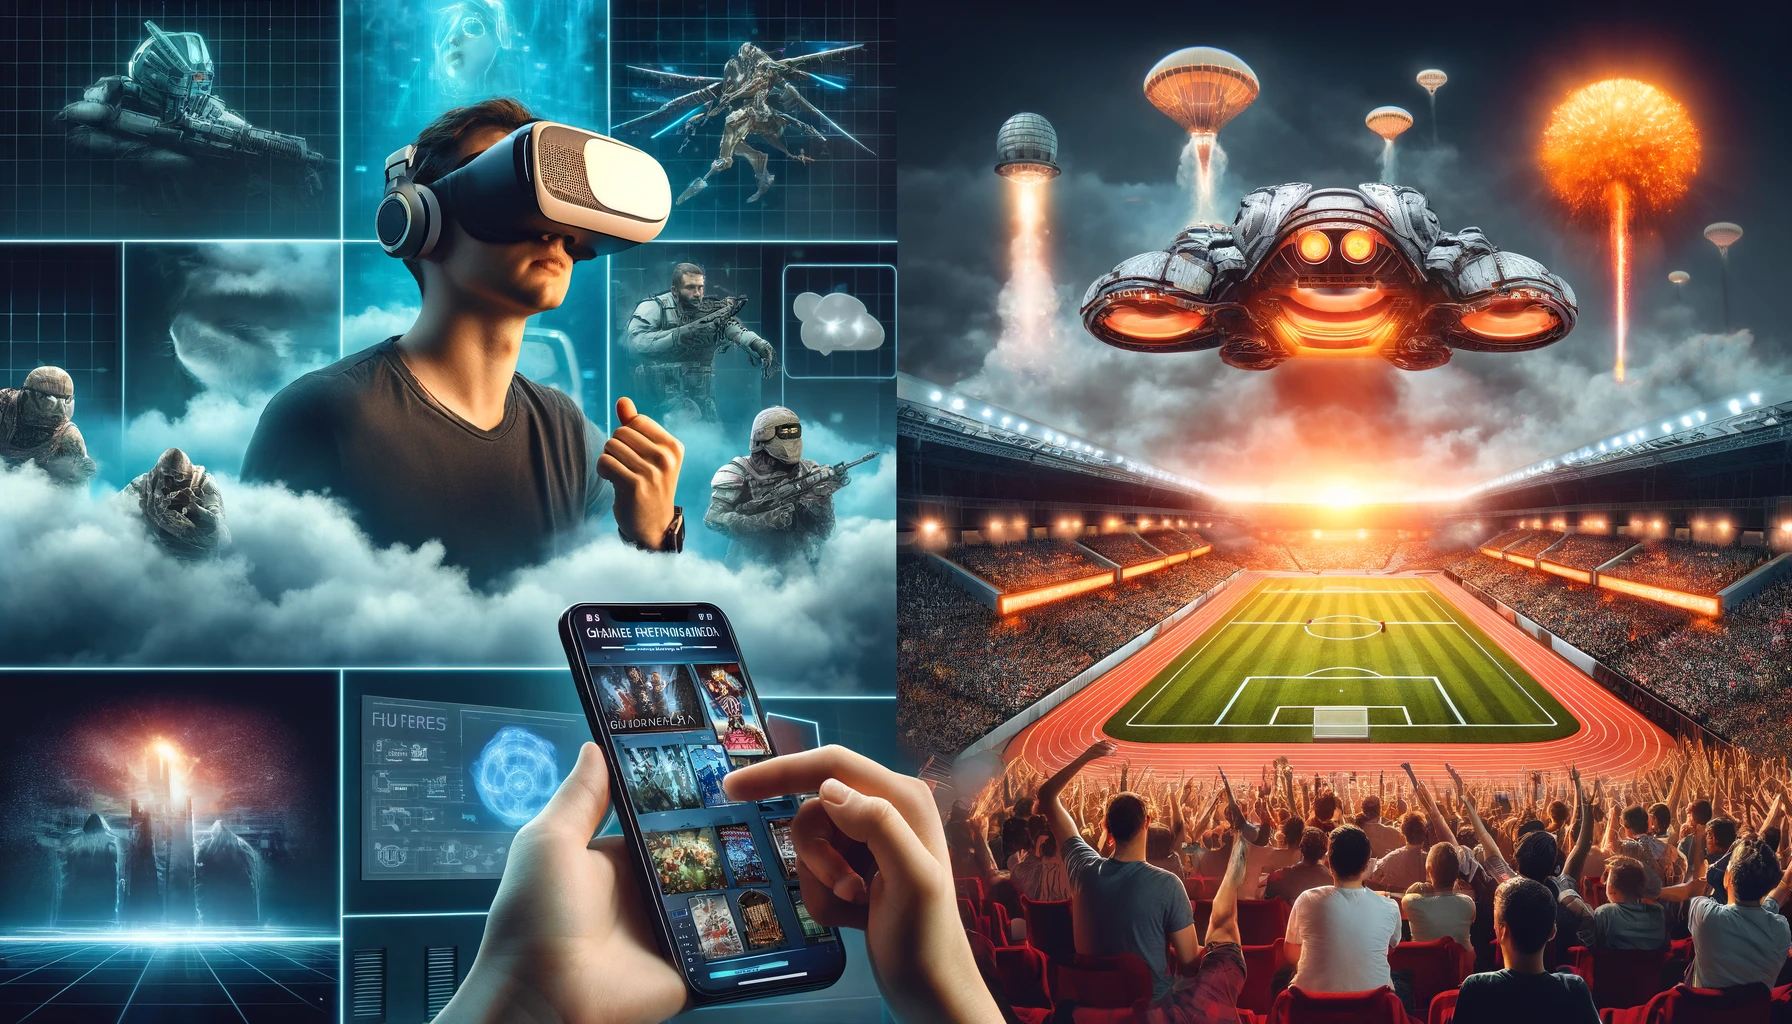 Collage: Top left shows a person in VR headset; top right, a phone with a cloud gaming platform; bottom left, an esports stadium; bottom right, traditional and futuristic gaming controllers.